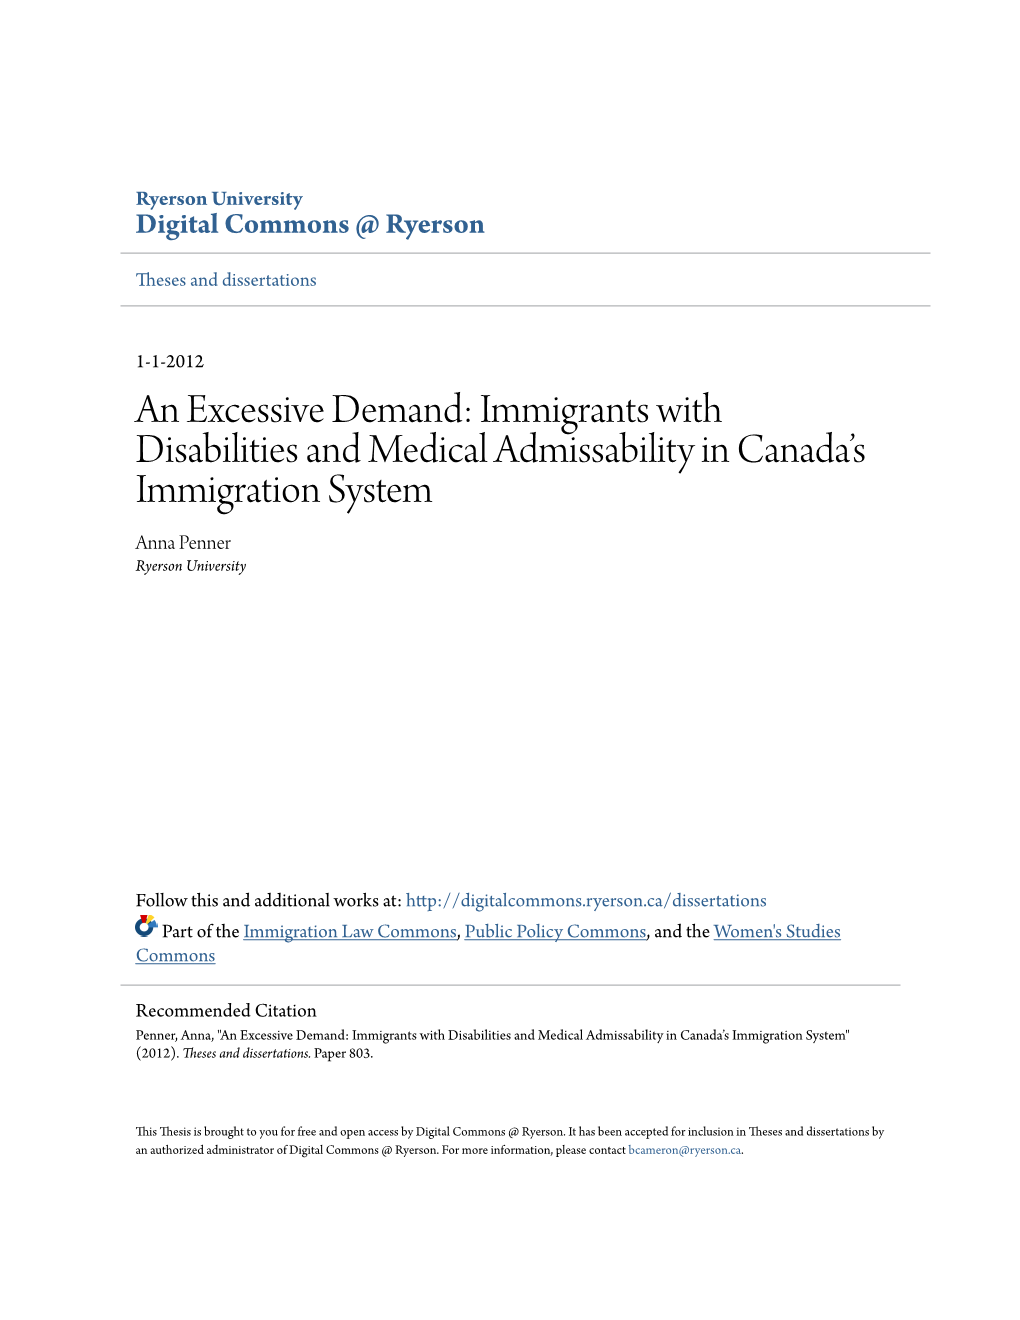 Immigration and Disability